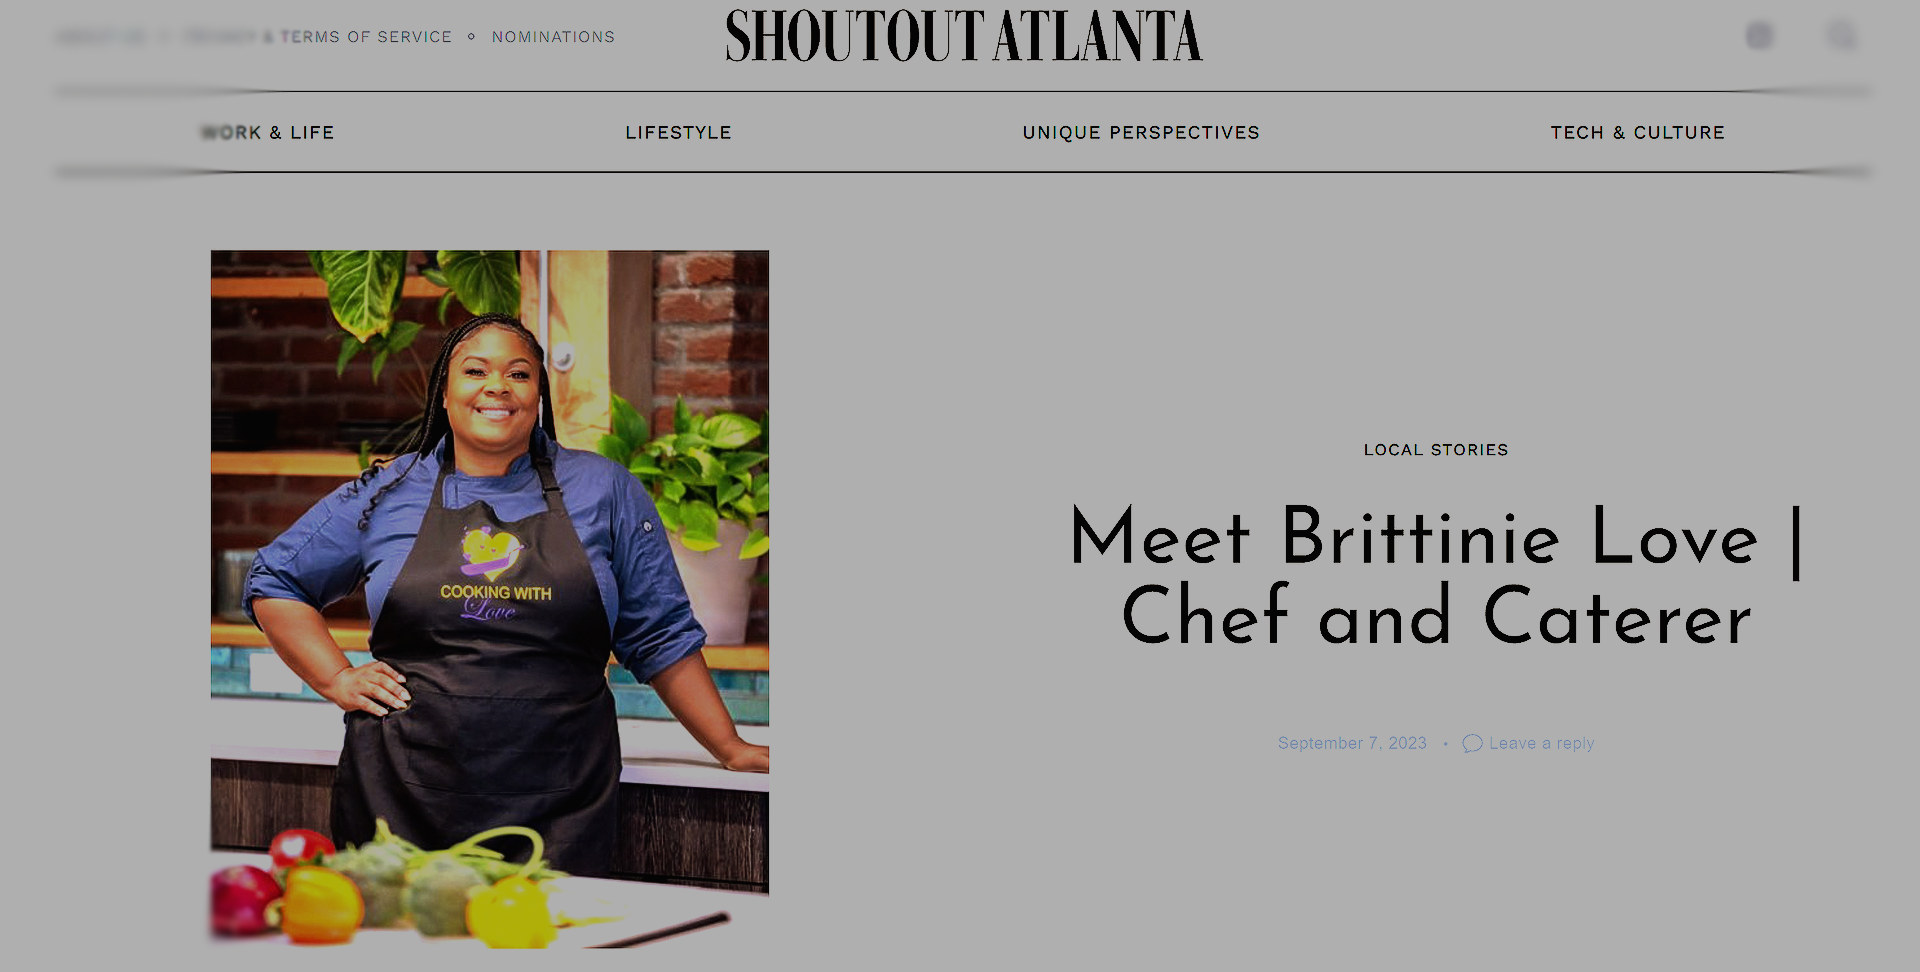 Shoutout Atlanta: Meet Brittinie Love | Chef and Caterer